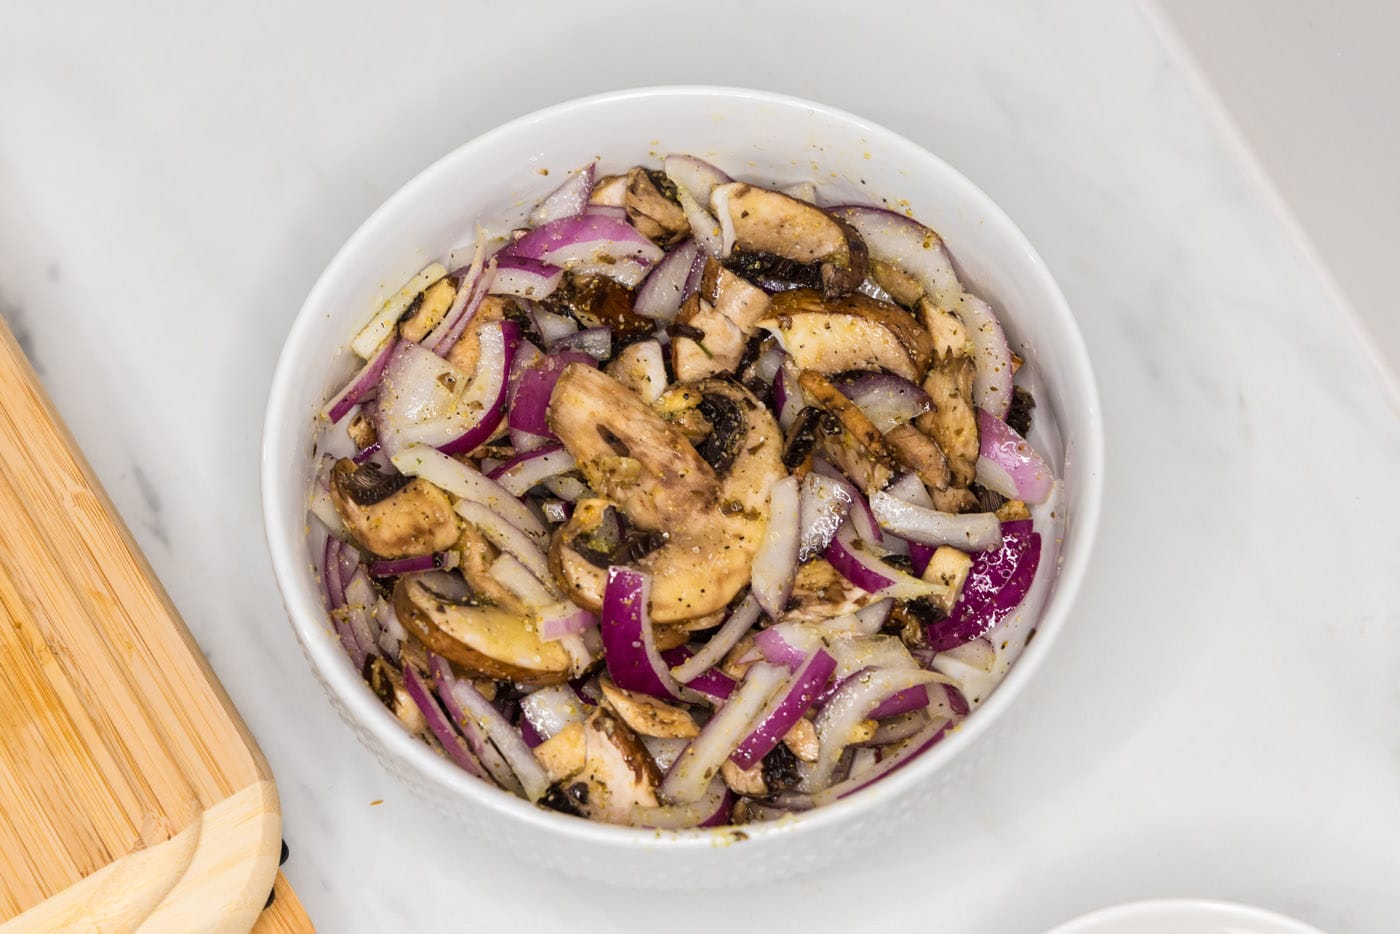 sliced mushrooms and red onion tossed with olive oil